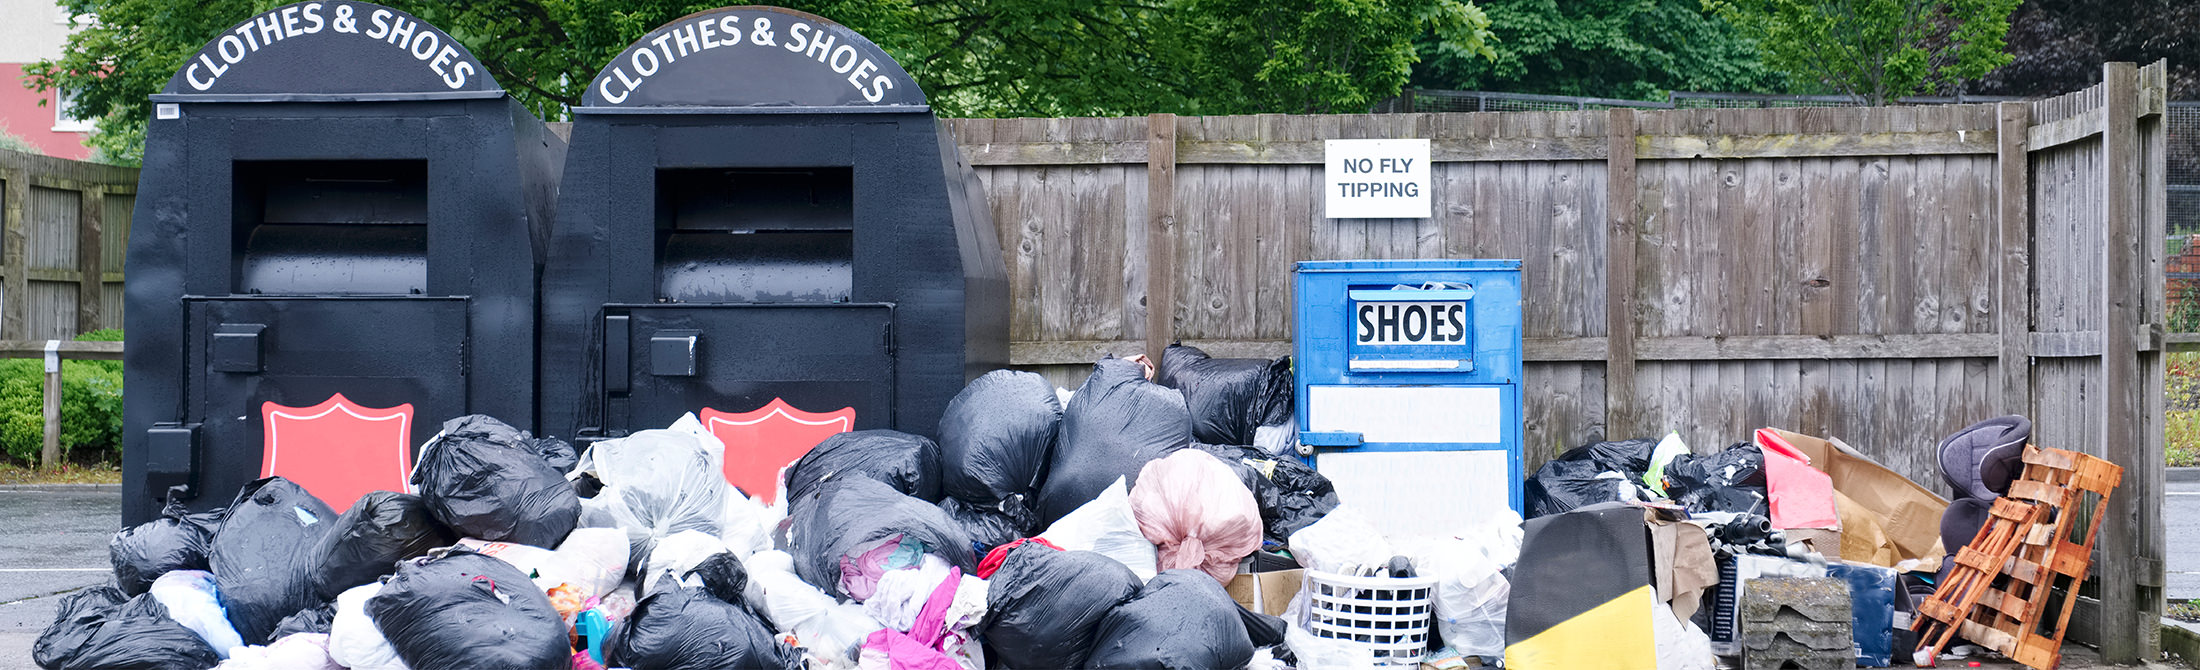 Fly-tipping next to clothing banks